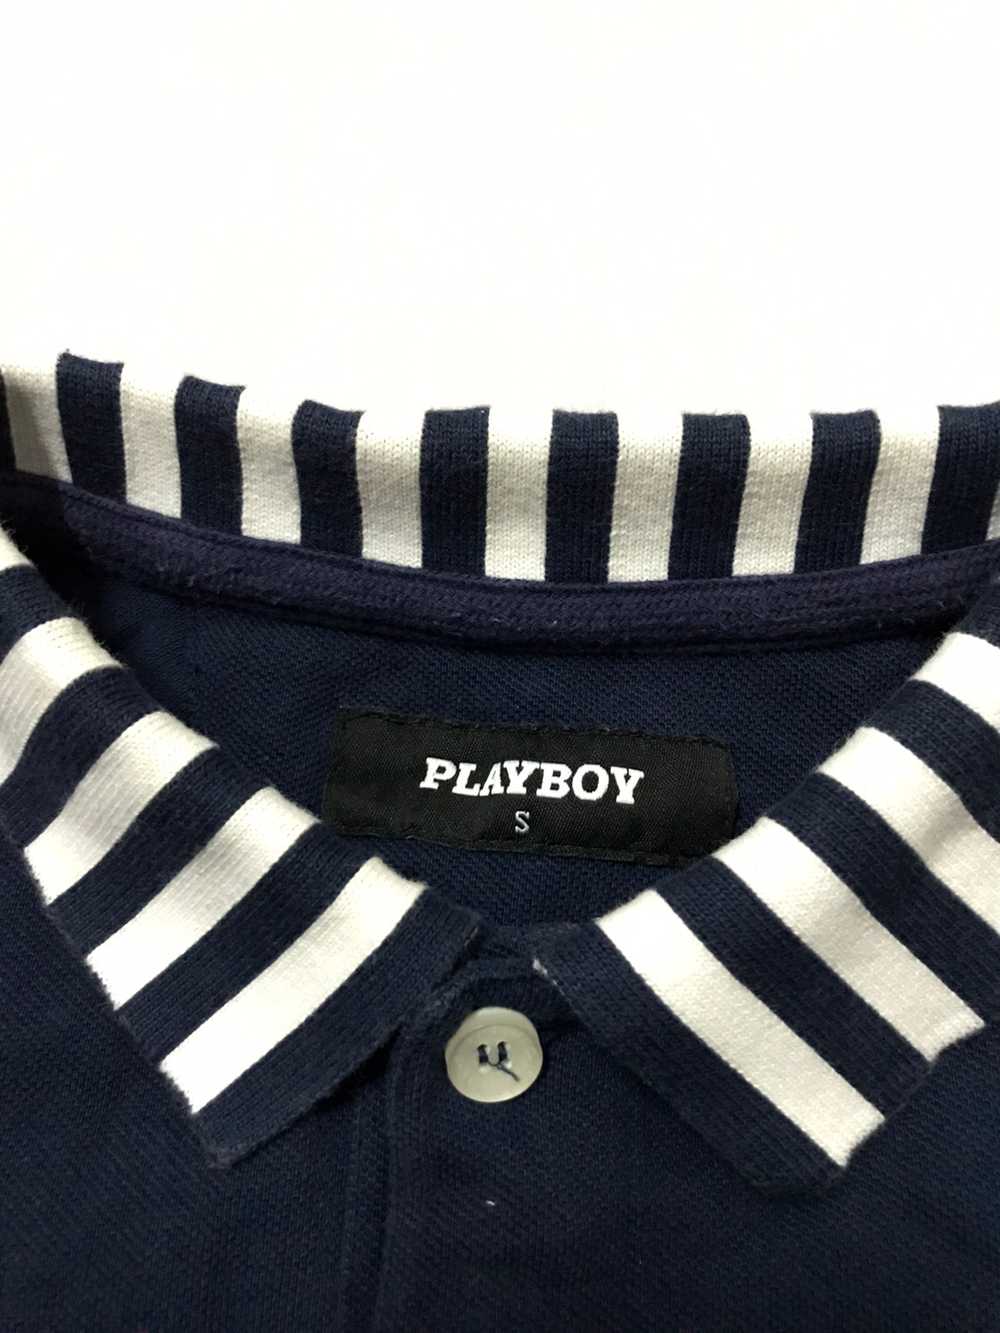 Playboy - Playboy polos for women’s - image 3